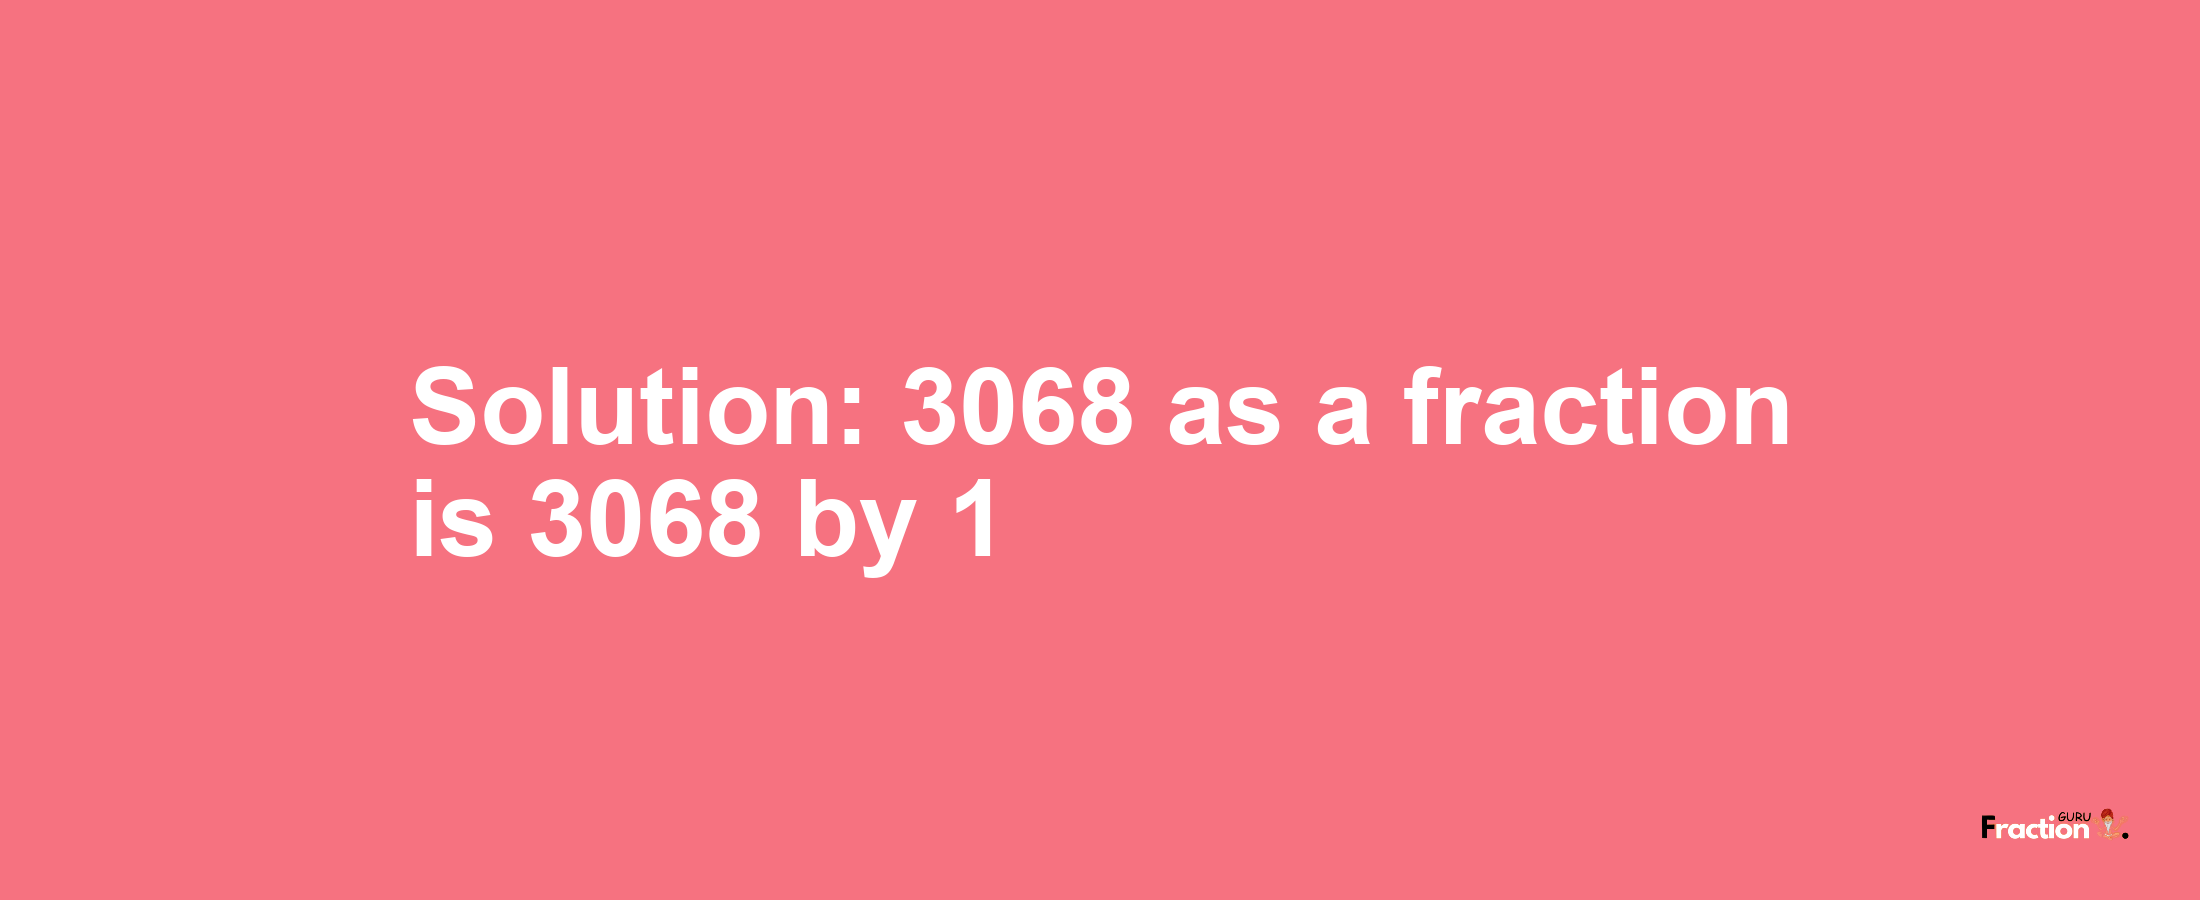 Solution:3068 as a fraction is 3068/1